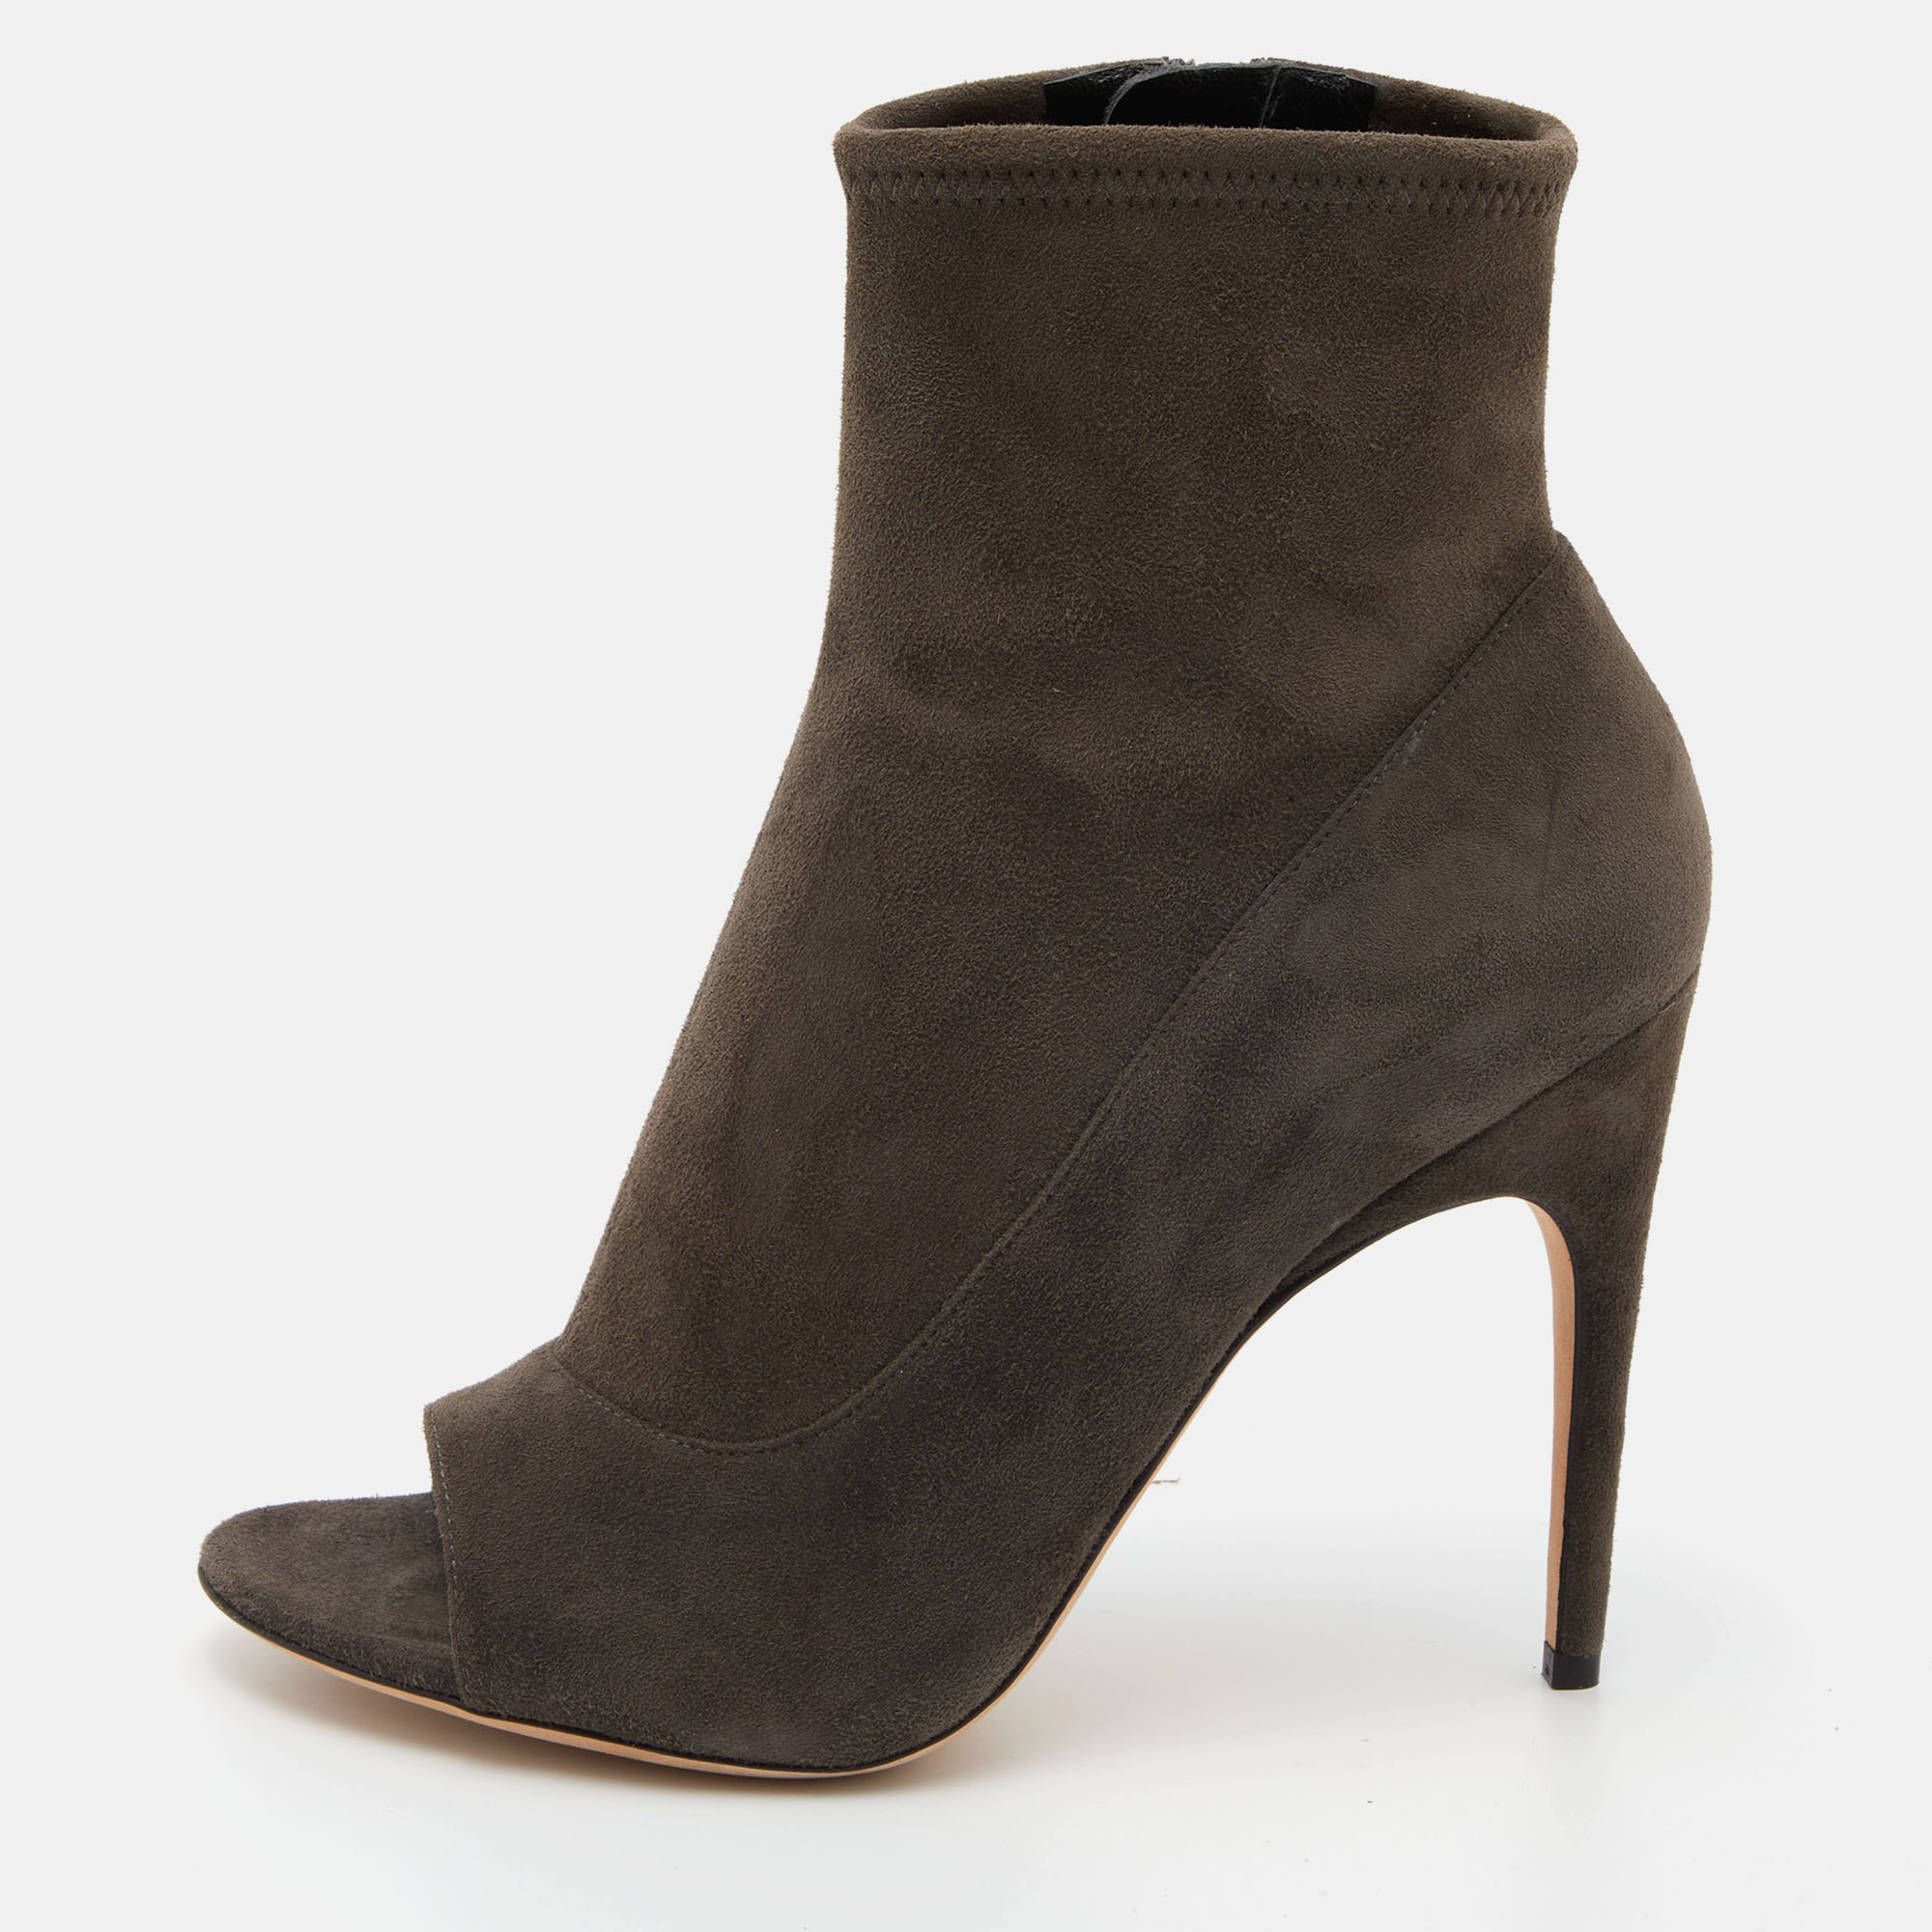 Sergio Rossi Grey Suede Open Toe Ankle Booties Size 39